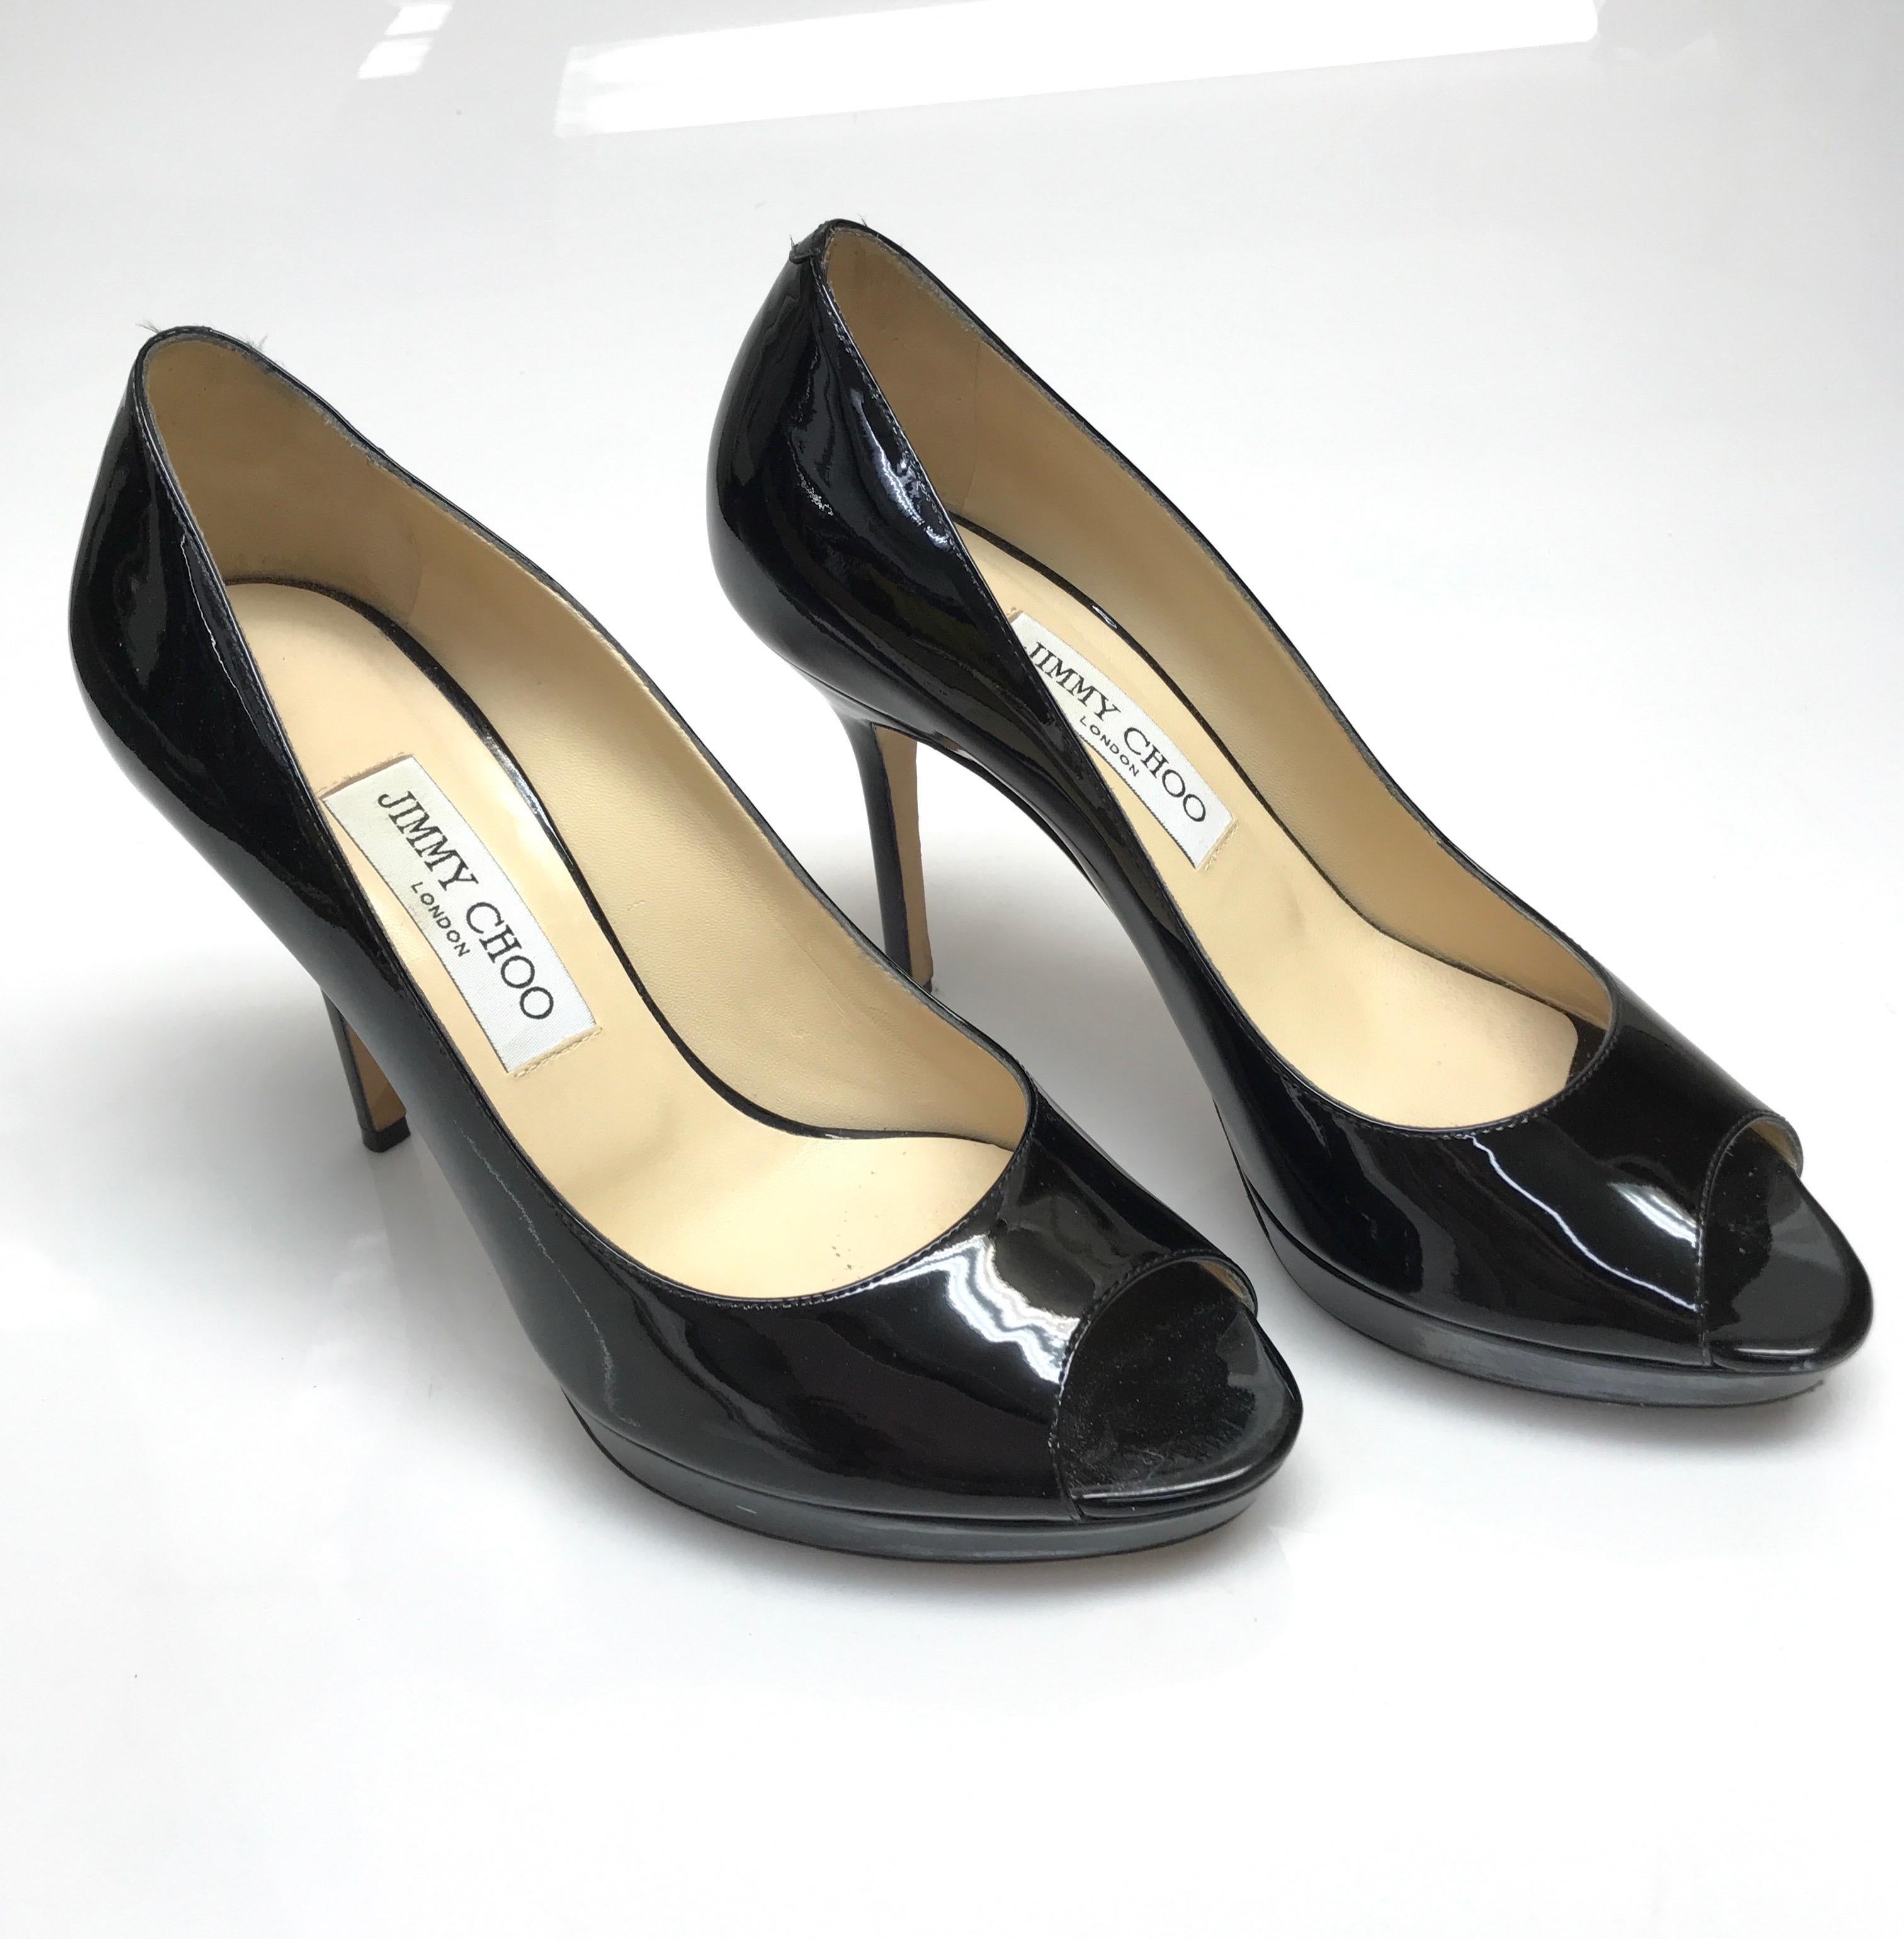 Jimmy Choo Black Patent Leather Peeptoe Heels-38. These stunning jimmy Choo heels are in good condition. They show sign of use on the bottom sole of the shoe as well as minor scuffs/scratches. These shoes are a black patent leather throughout. They